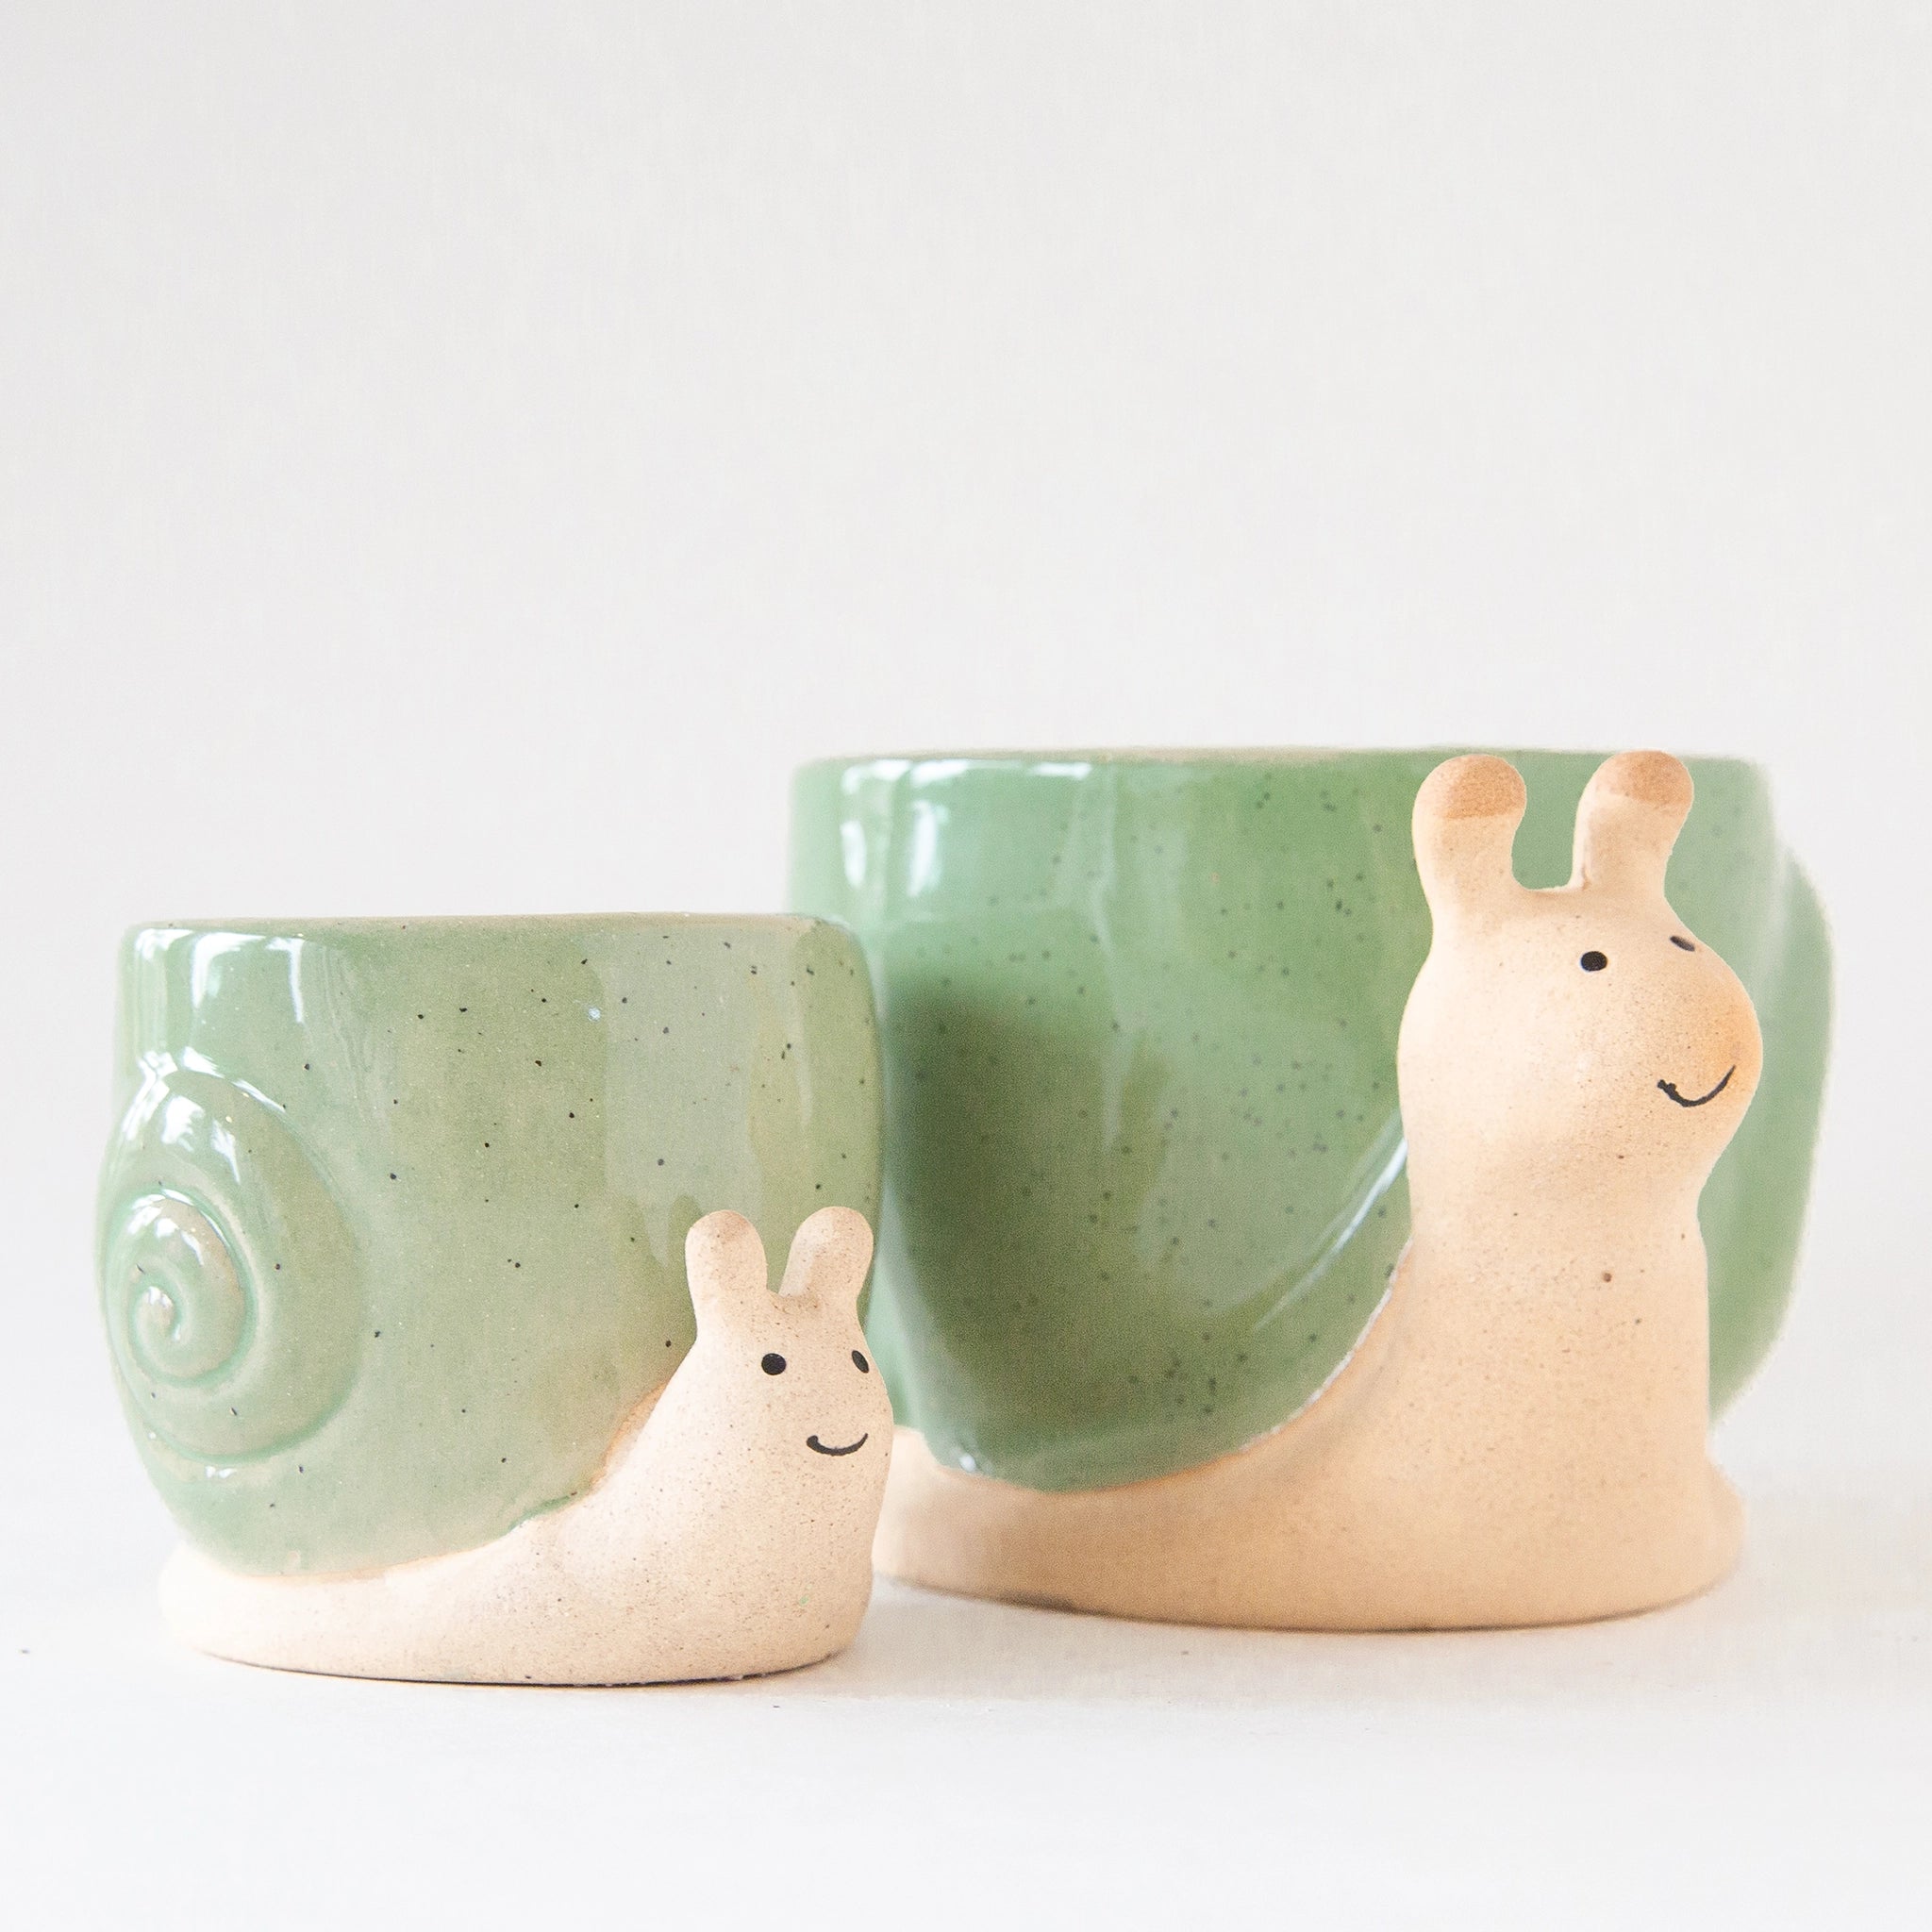 On a light grey background is two ceramic planters in the shape of a snail with smiling faces and a swirly green &quot;shell&quot;.